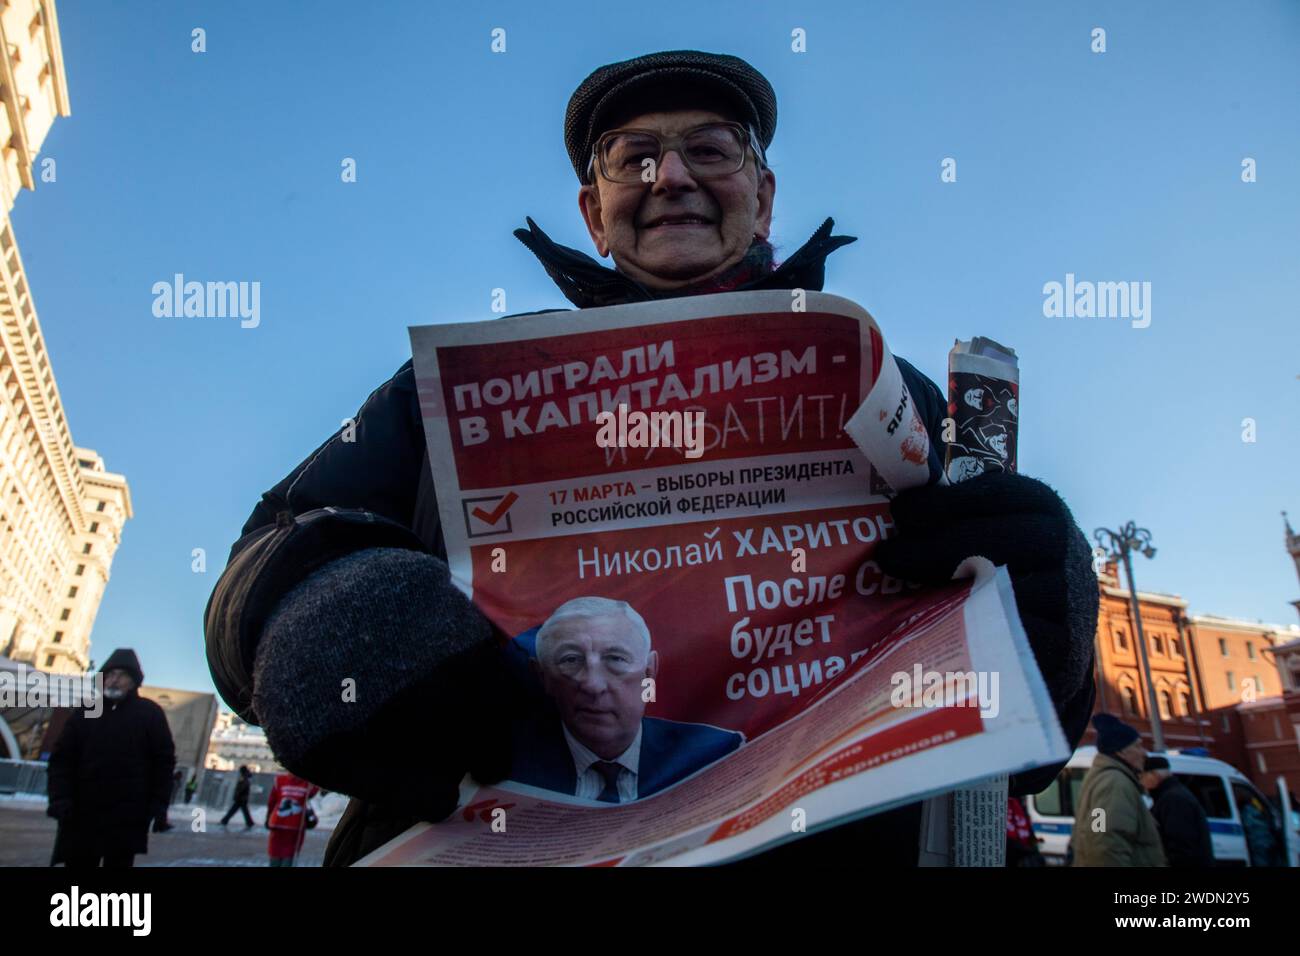 Moscow, Russia. 21st of January, 2024. Russian Communist supporter reads a campaign leaflet of the Nikolai Kharitonov presidential candidate of the Russian Federation as they walk to lay flowers at the Mausoleum of the Soviet founder Vladimir Lenin to mark the 100th anniversary of his death, in Red Square, Moscow, Russia. Credit: Nikolay Vinokurov/Alamy Live News Stock Photo